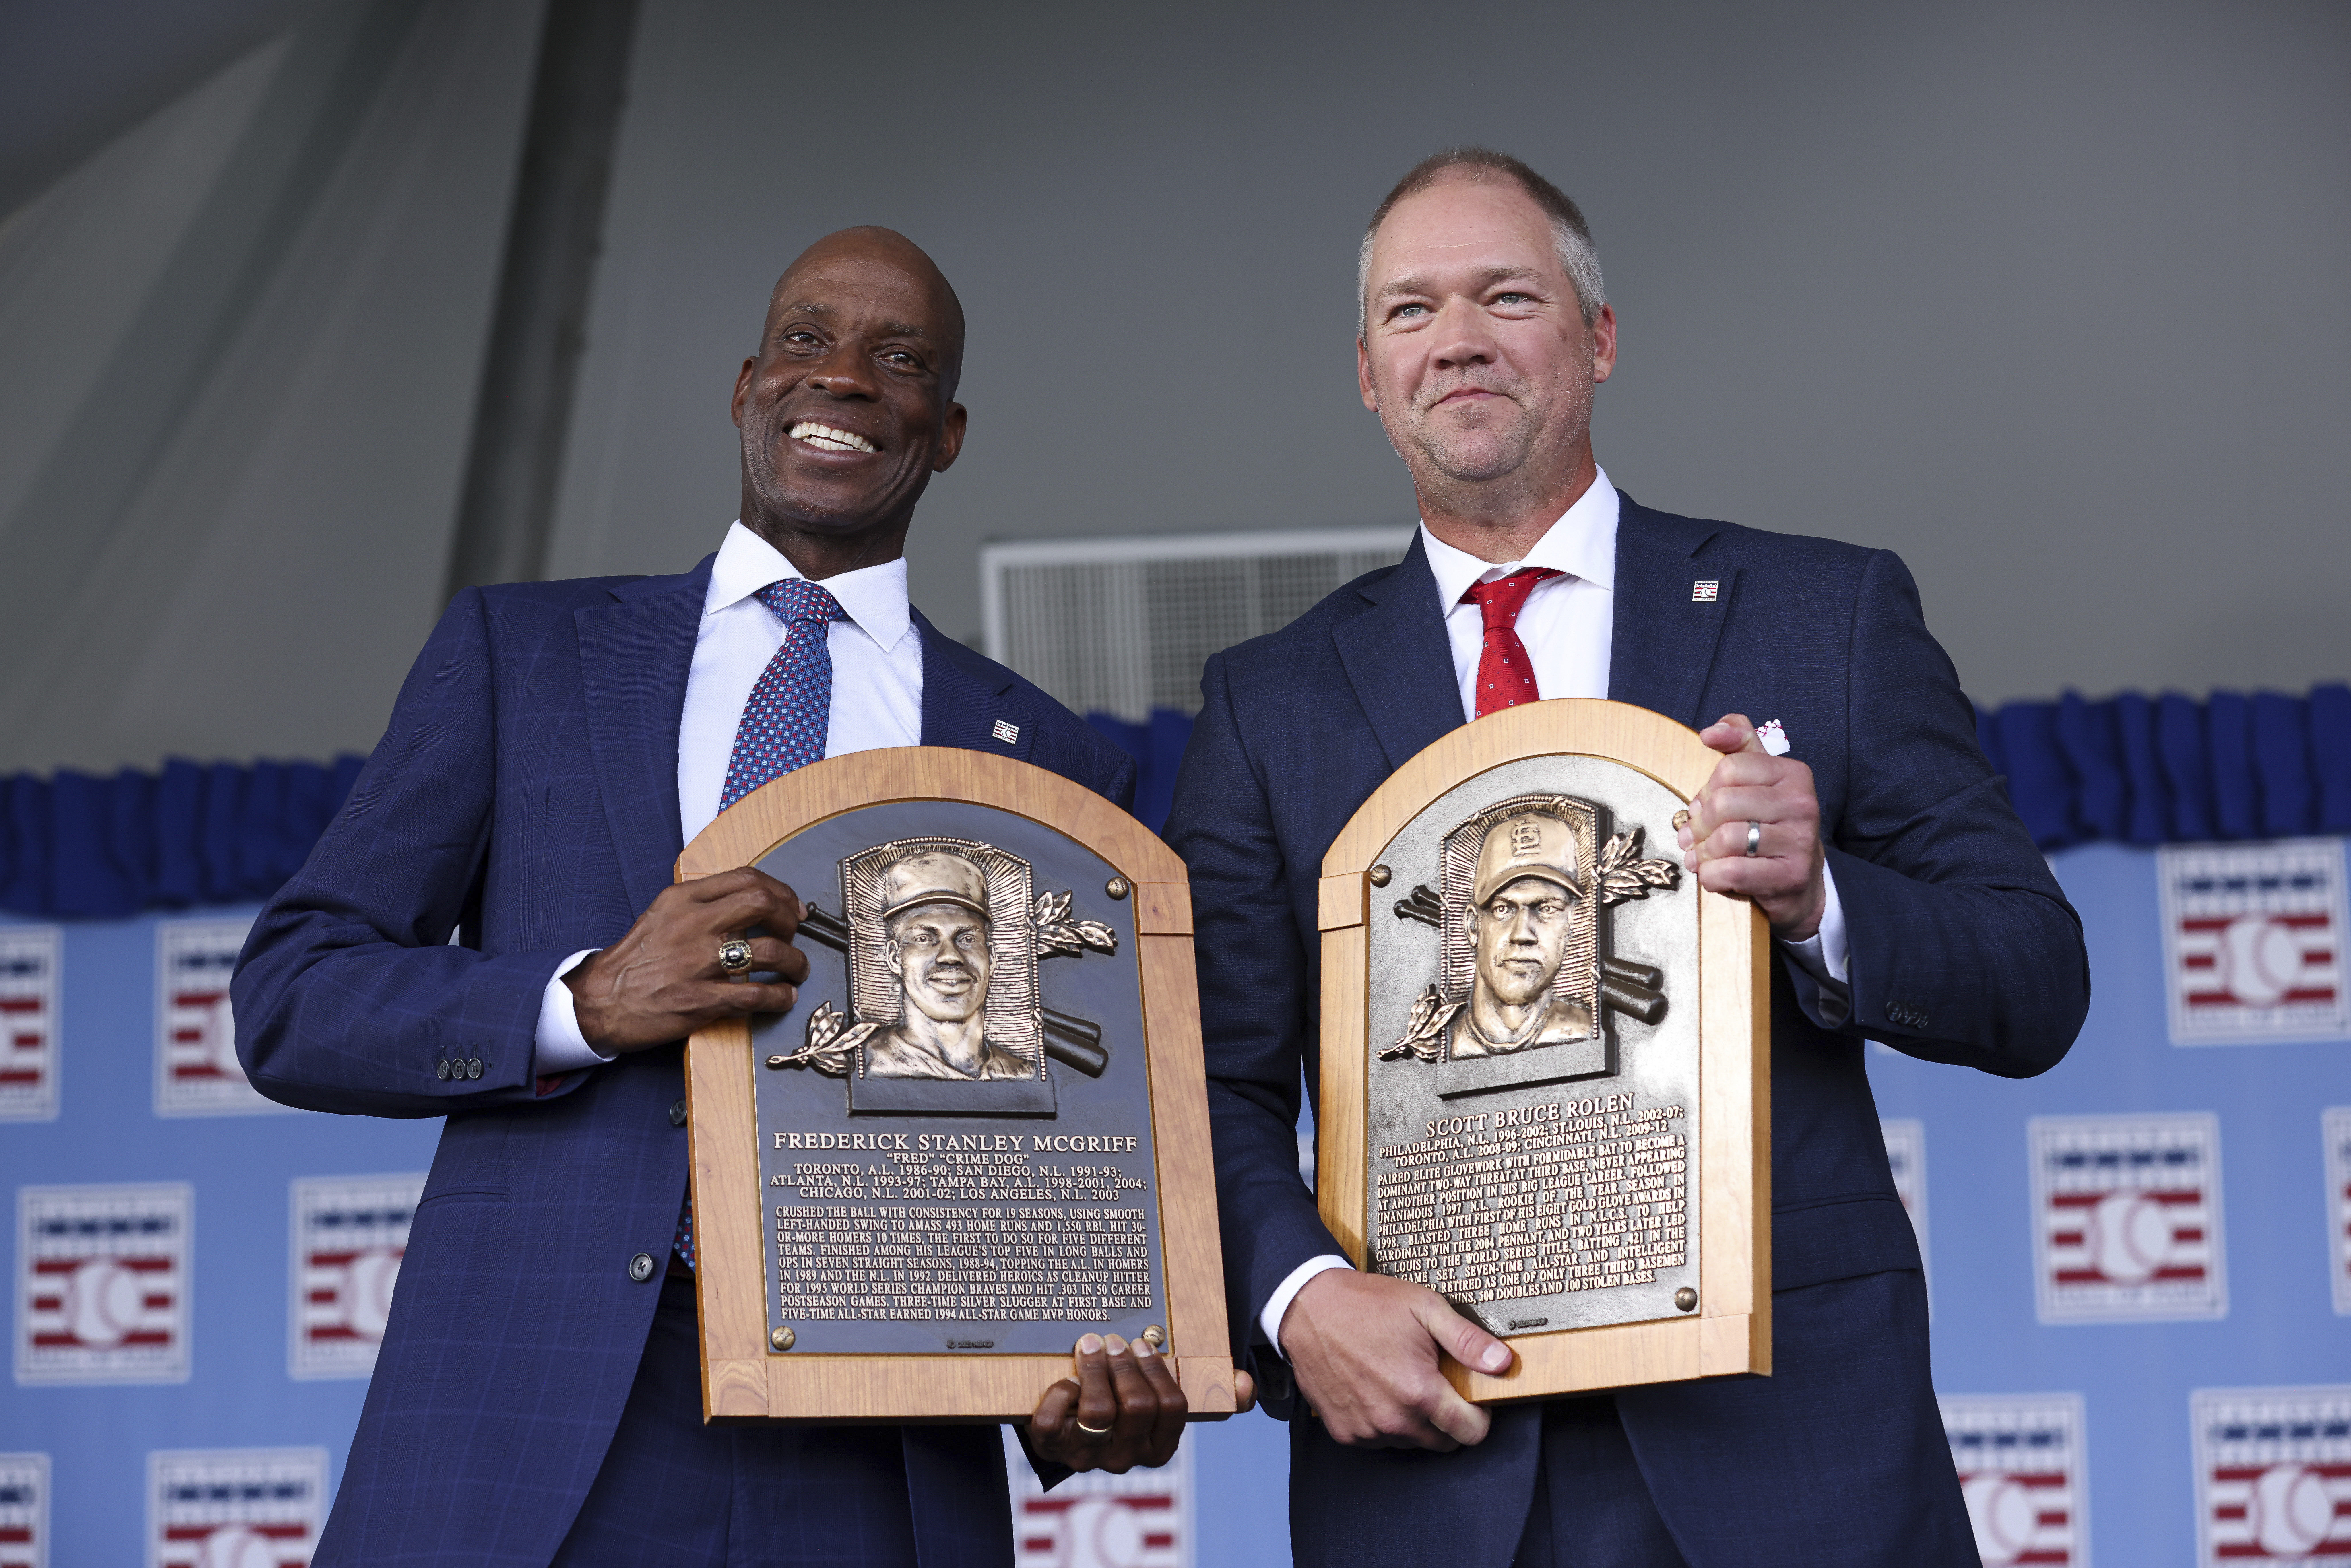 Post's writers vote just one into Baseball Hall of Fame